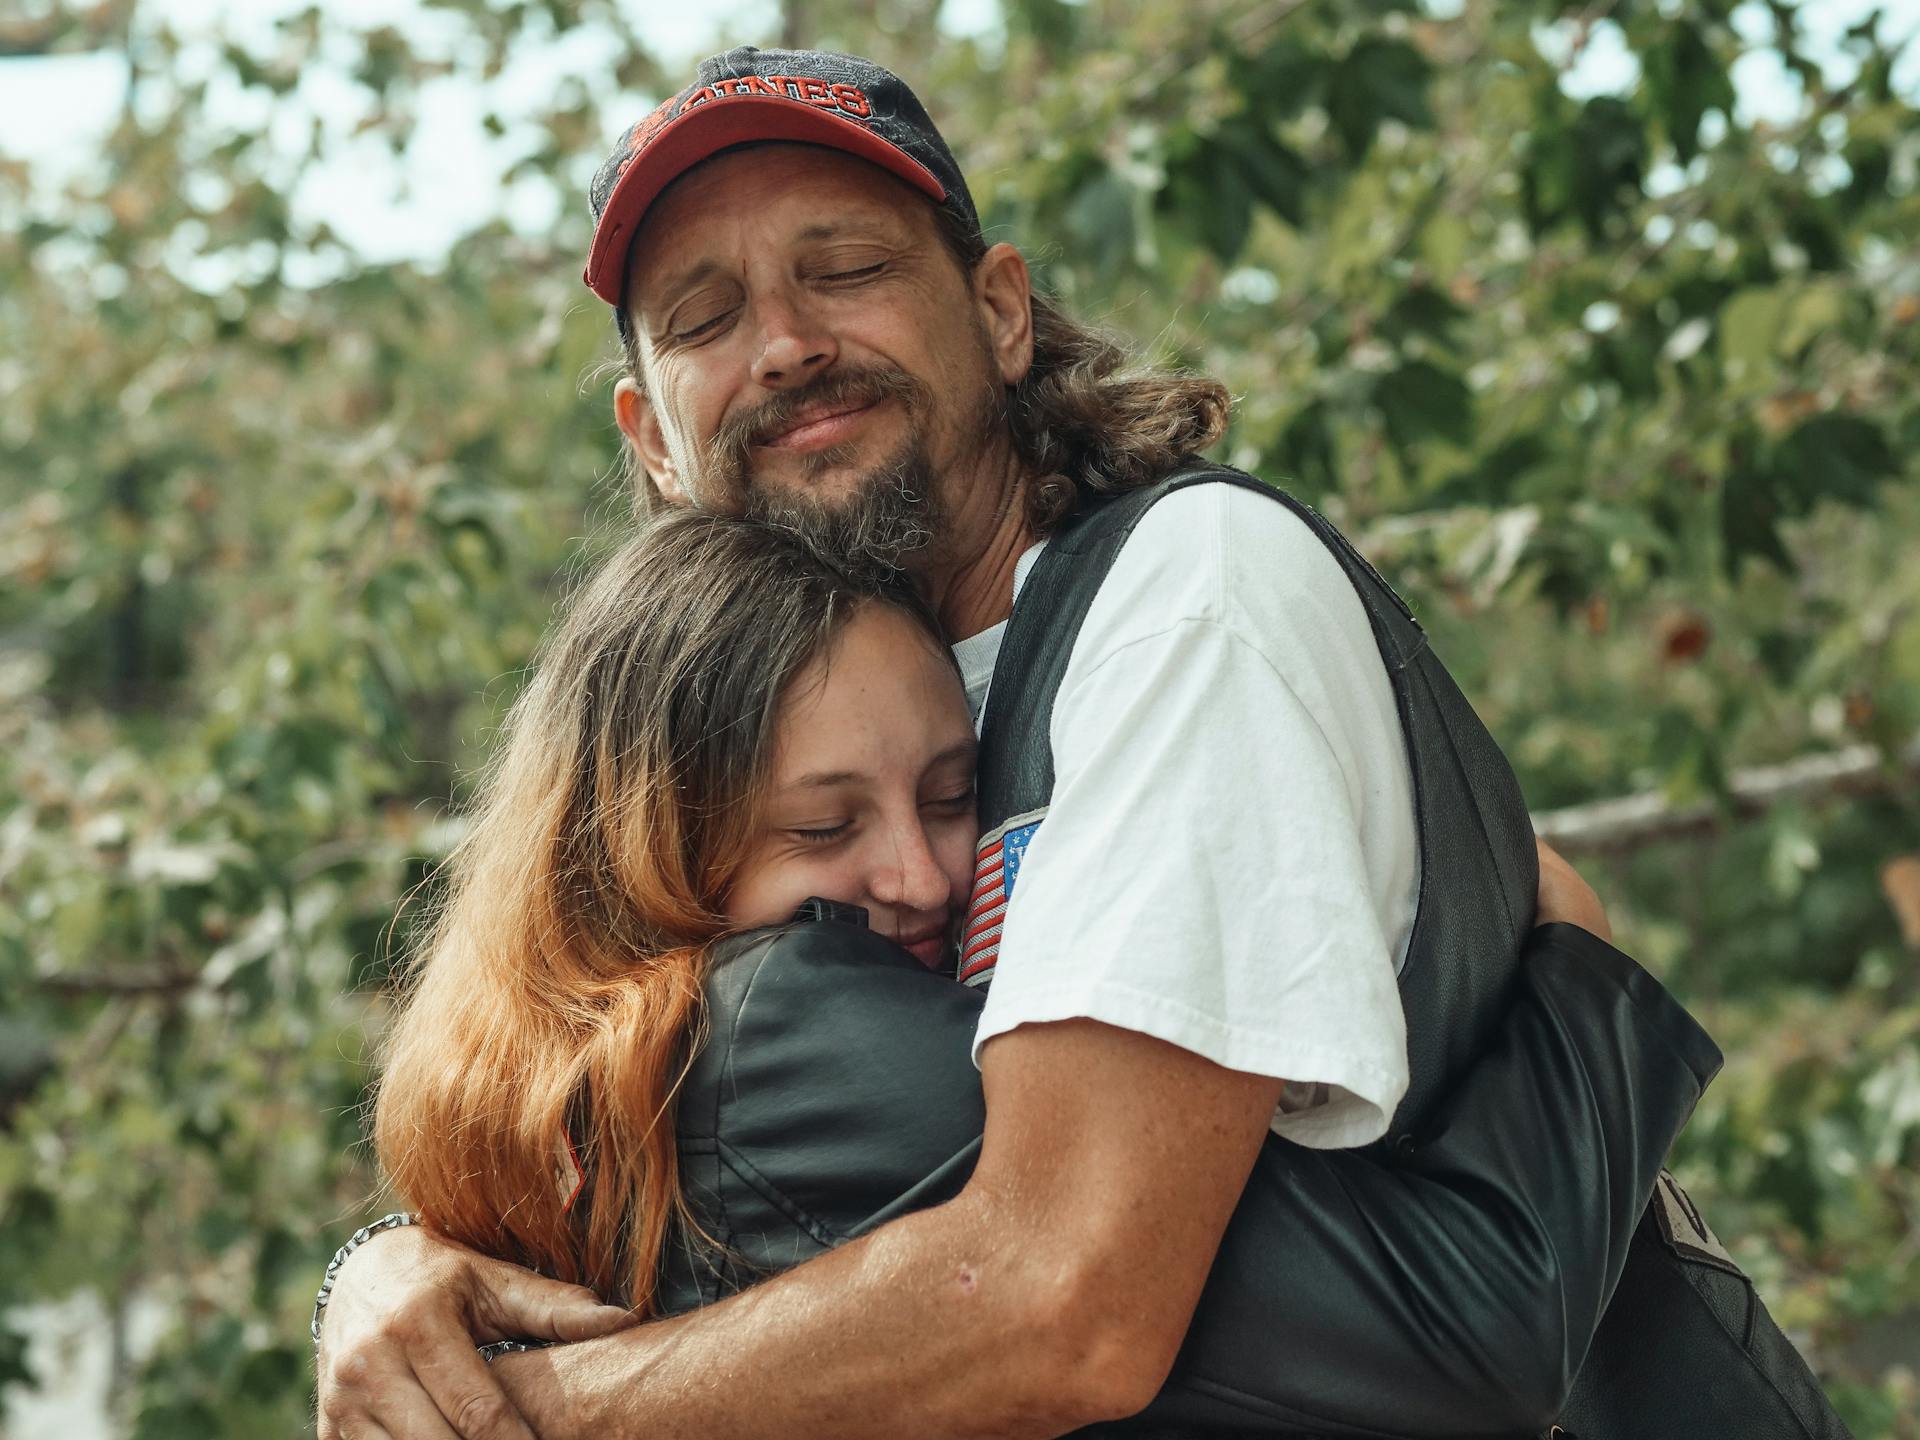 A father hugging his daughter | Source: Pexels